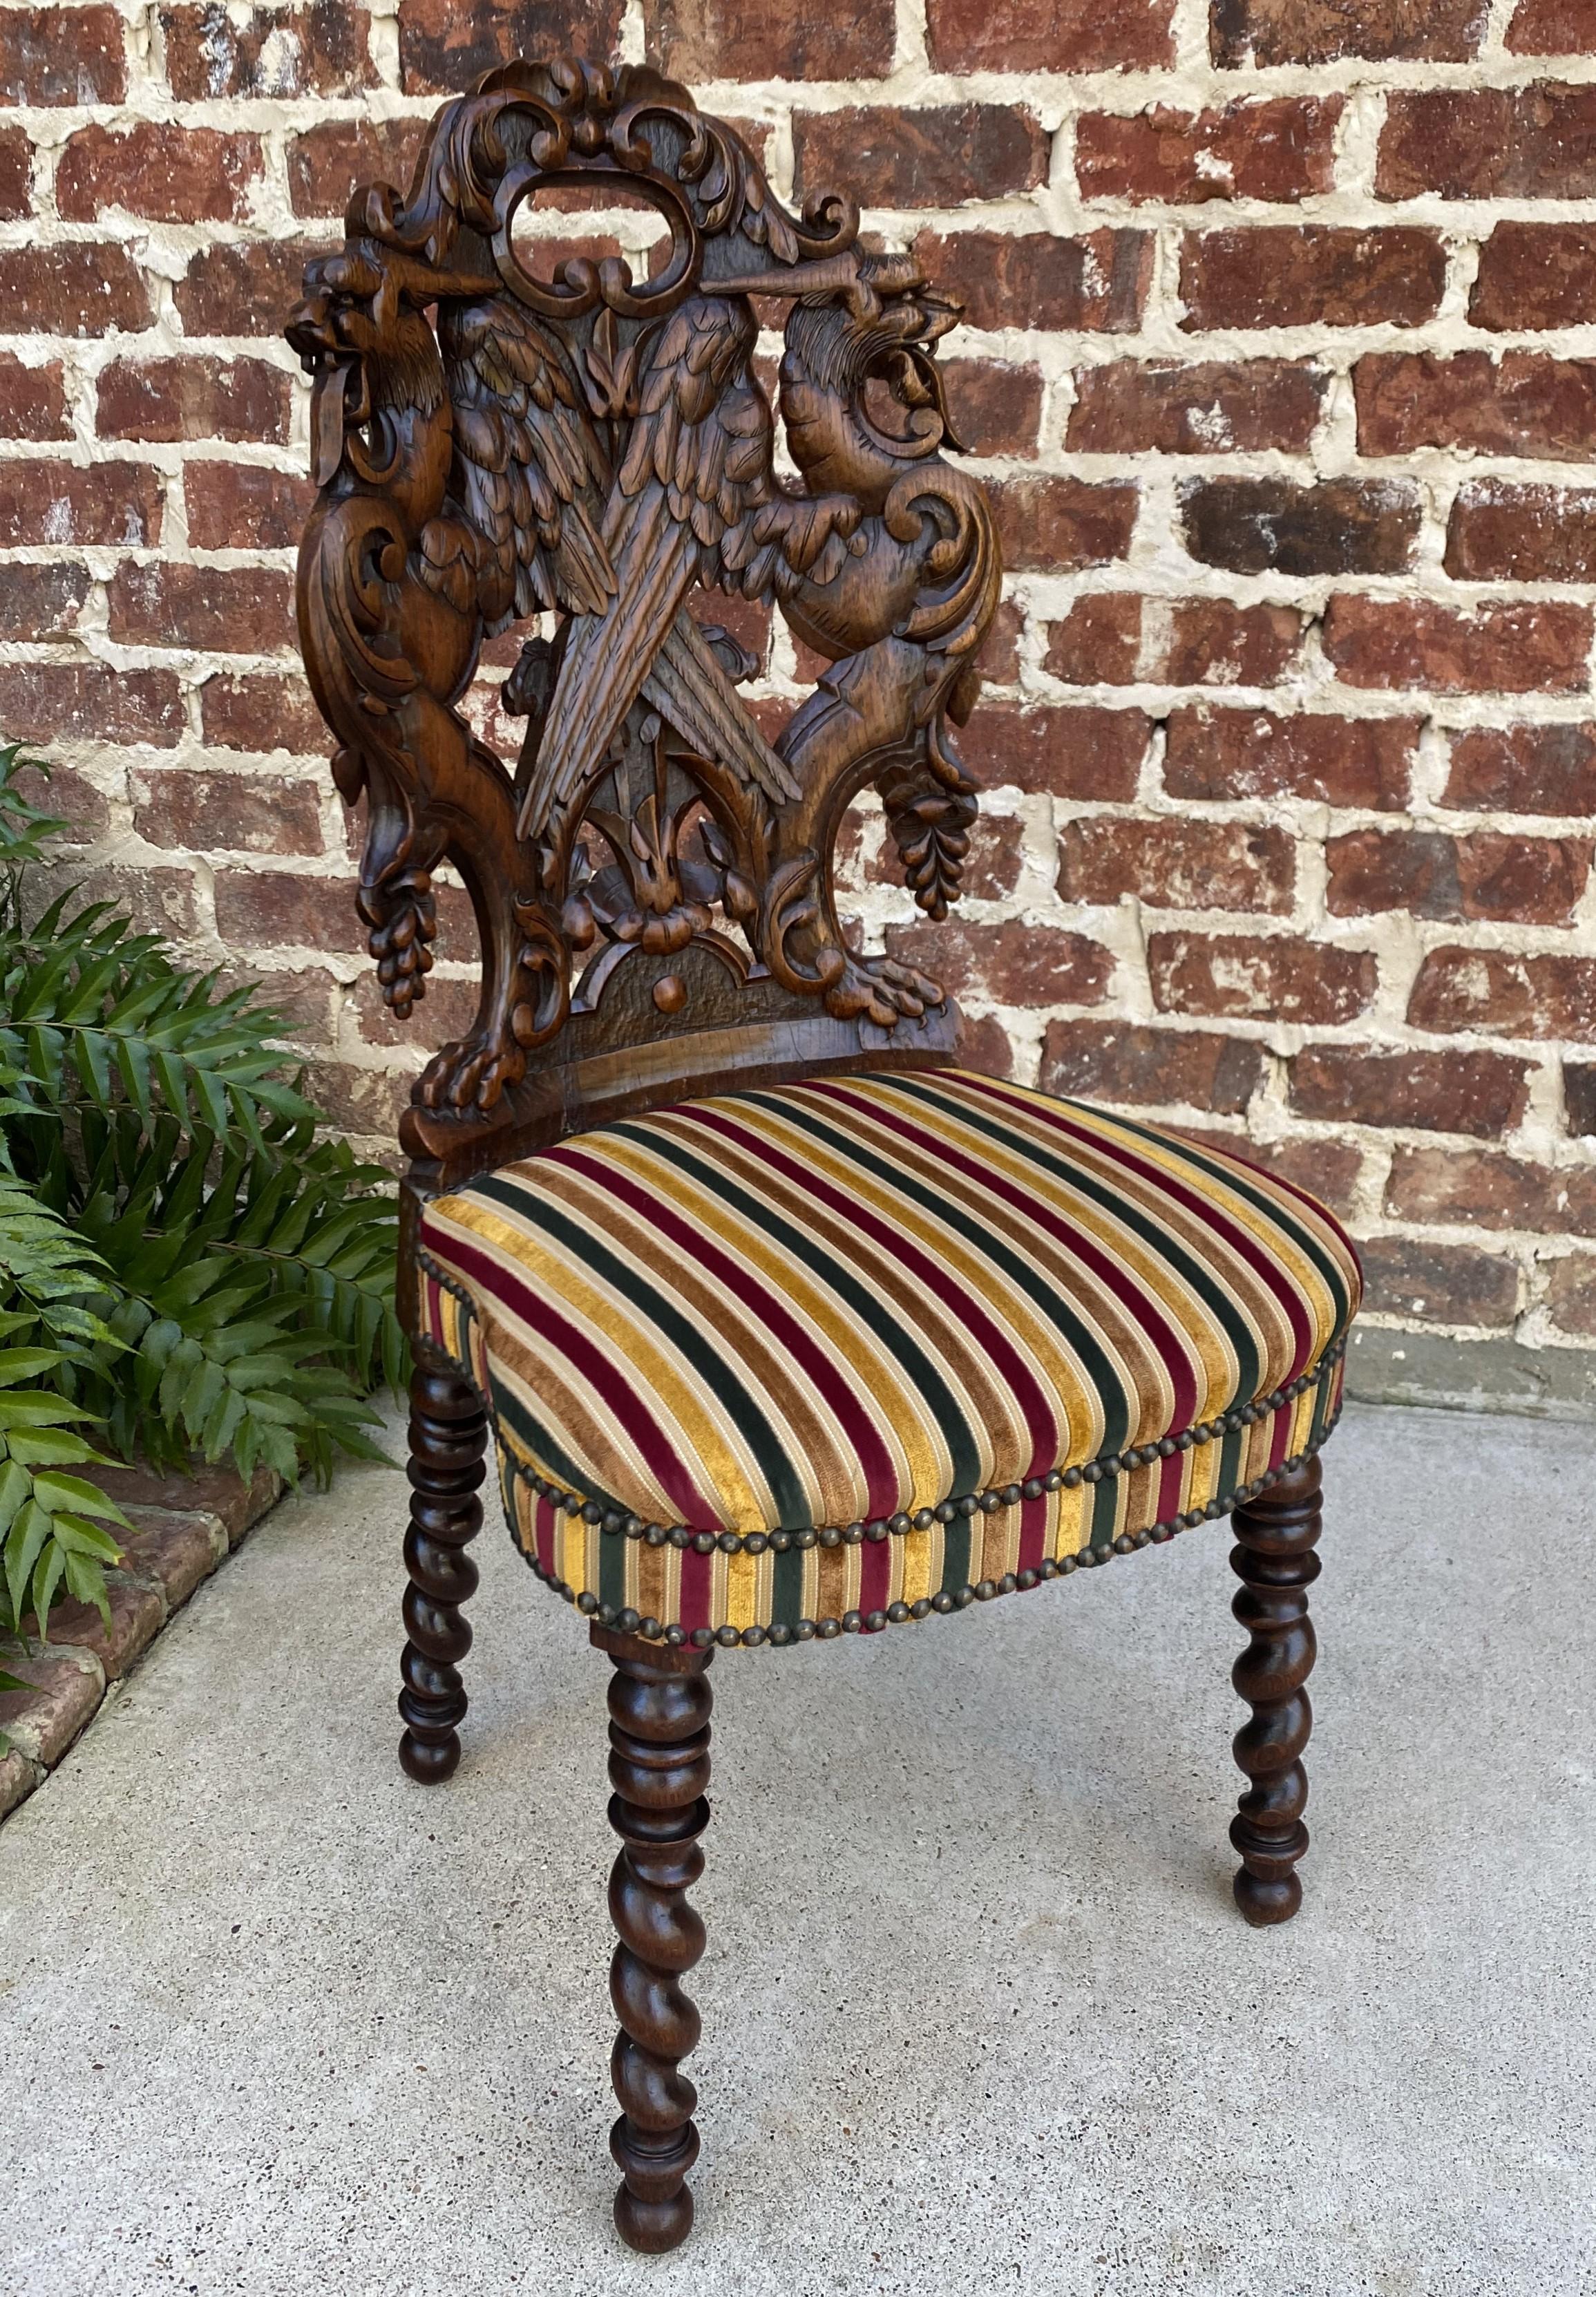 Rare antique French oak Black Forest upholstered chair with barley twist legs~~19th century

Exquisite back is carved from one solid piece of oak~~red, gold and green striped upholstery is in excellent condition~~sturdy barley twist legs~~such a